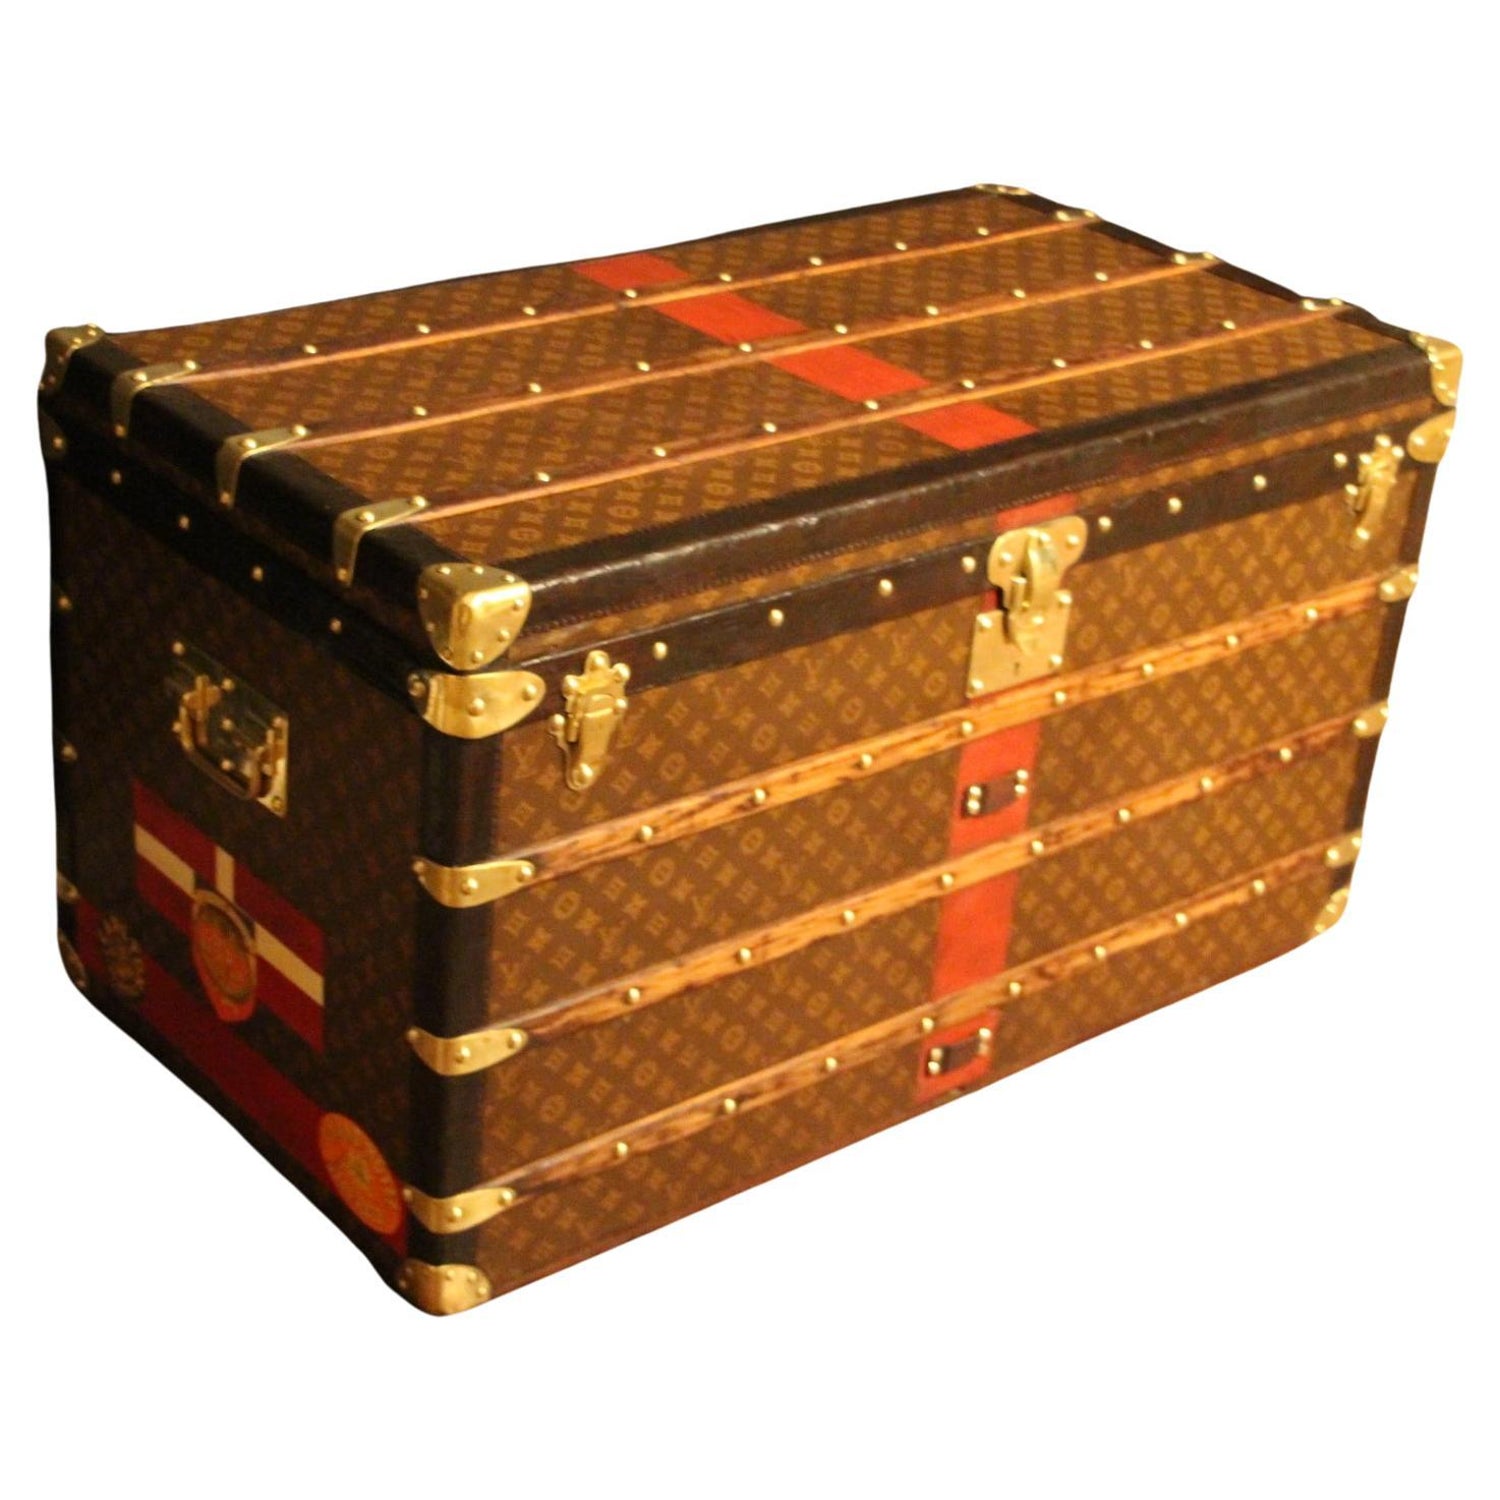 A LIMITED EDITION PAINTED MONOGRAM COURRIER LOZINE TRUNK 110 WITH